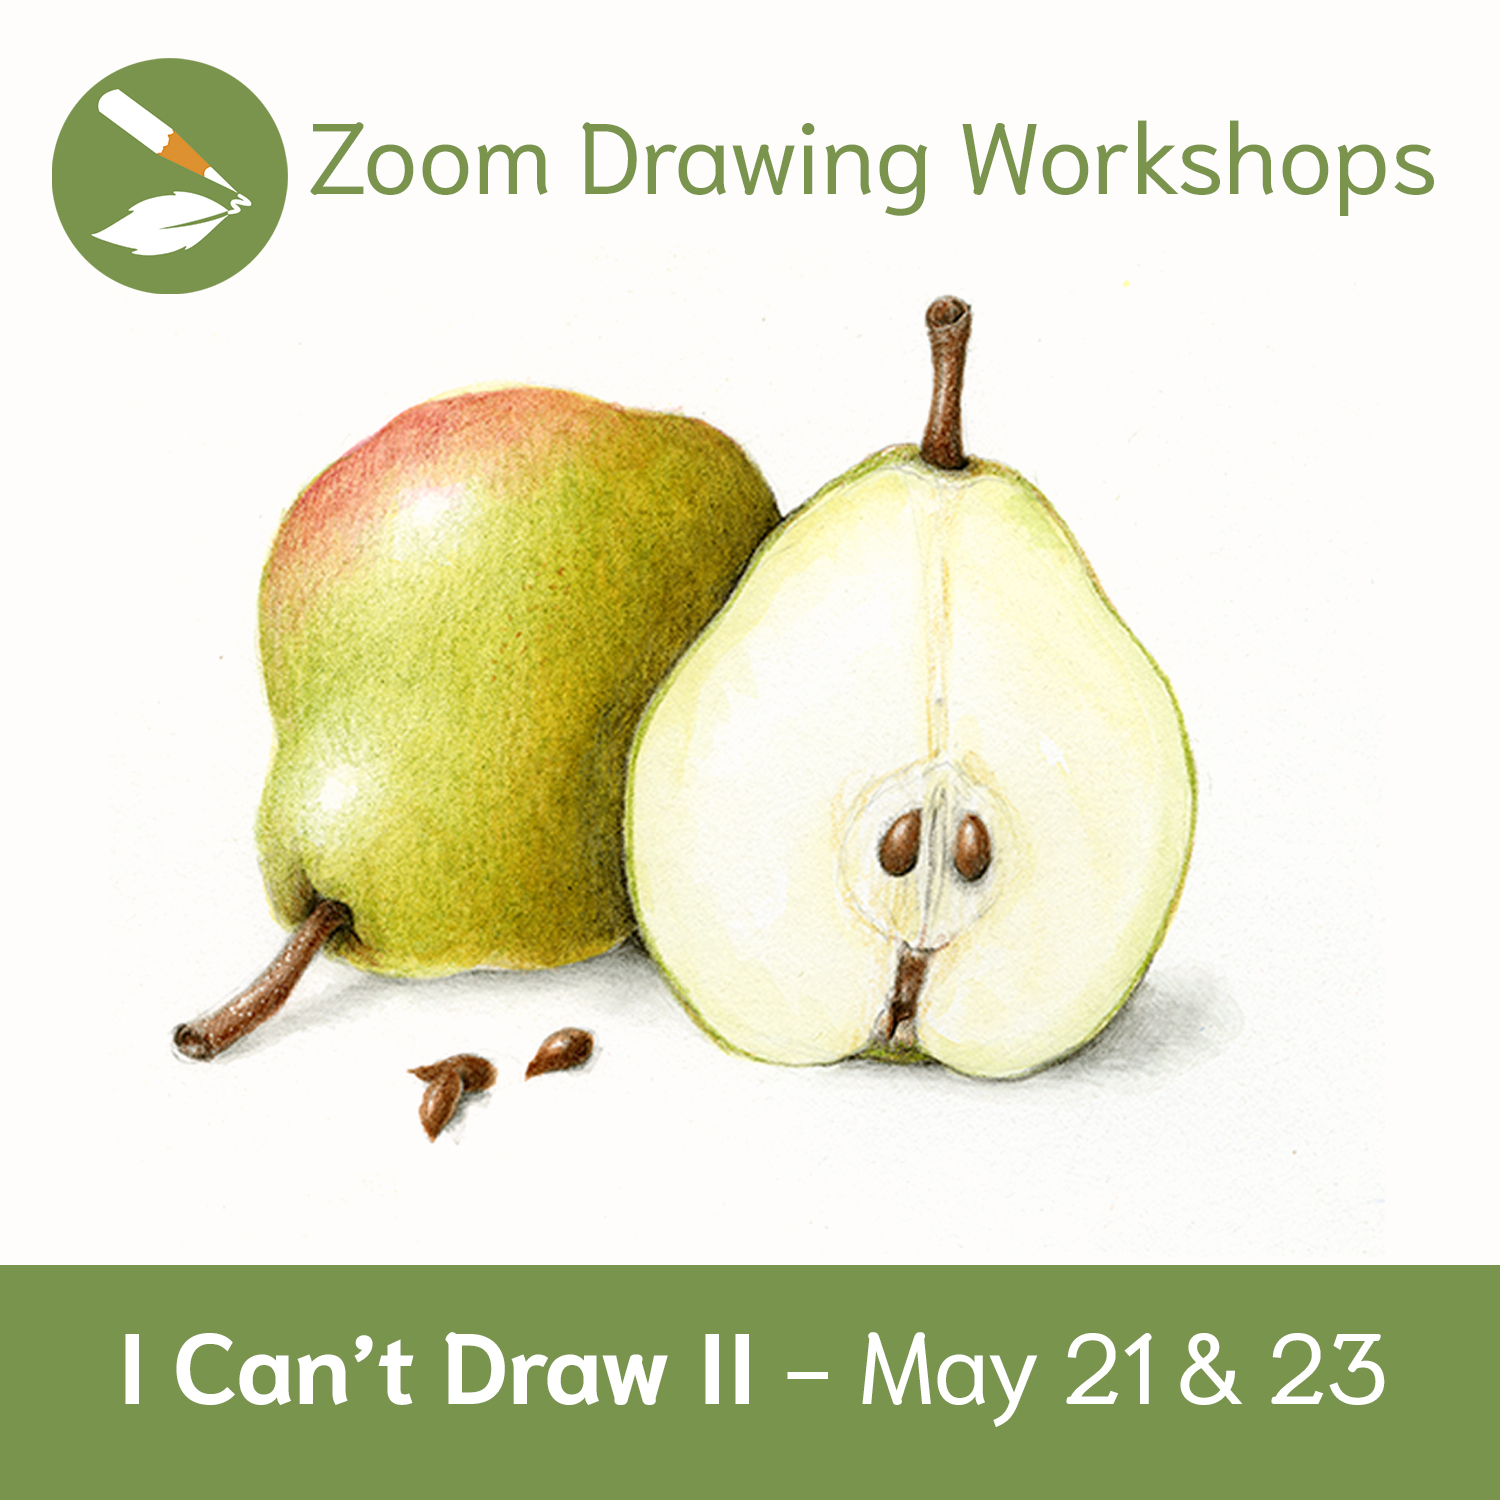 Zoom 41 "I Cant Draw" II Measuring and Perspective Draw